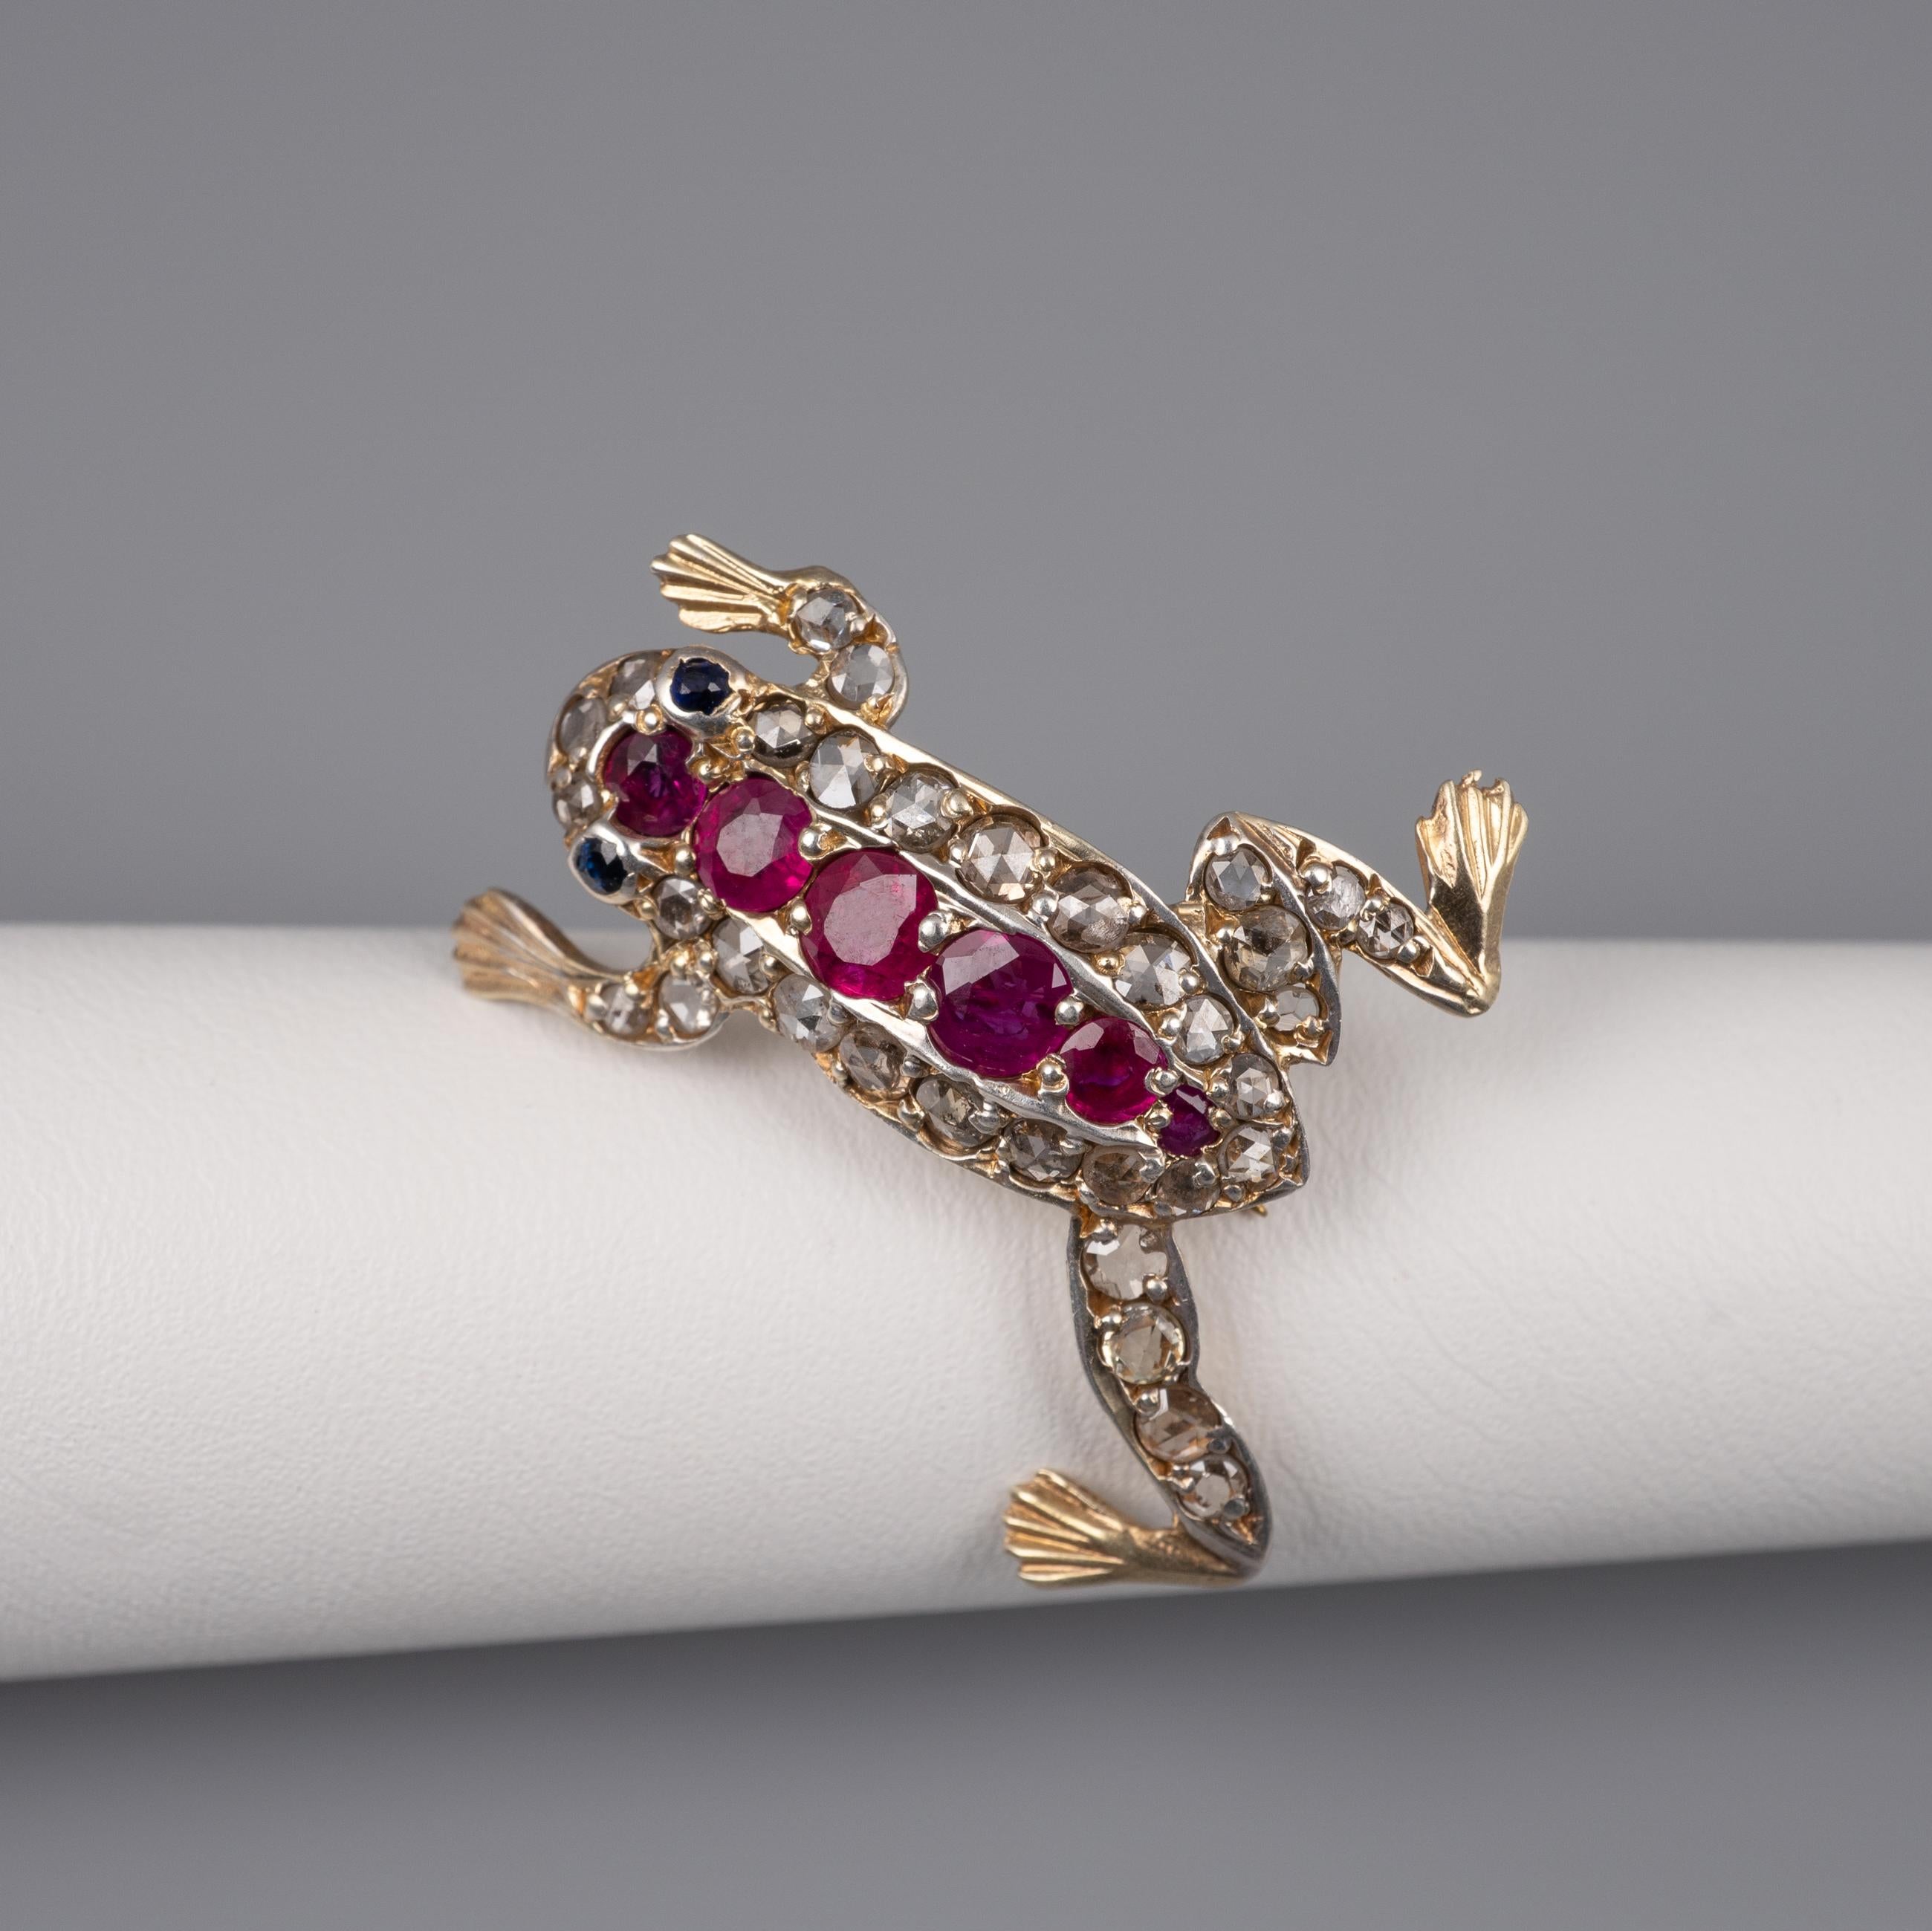 The most adorable antique Art Deco 14-carat gold Frog brooch decorated with old rose cut diamonds totaling 0.90 carats, a stripe of natural rubies totaling 0.70 carats and little sapphire eyes. You need this in your frog collection!

The gold pin is